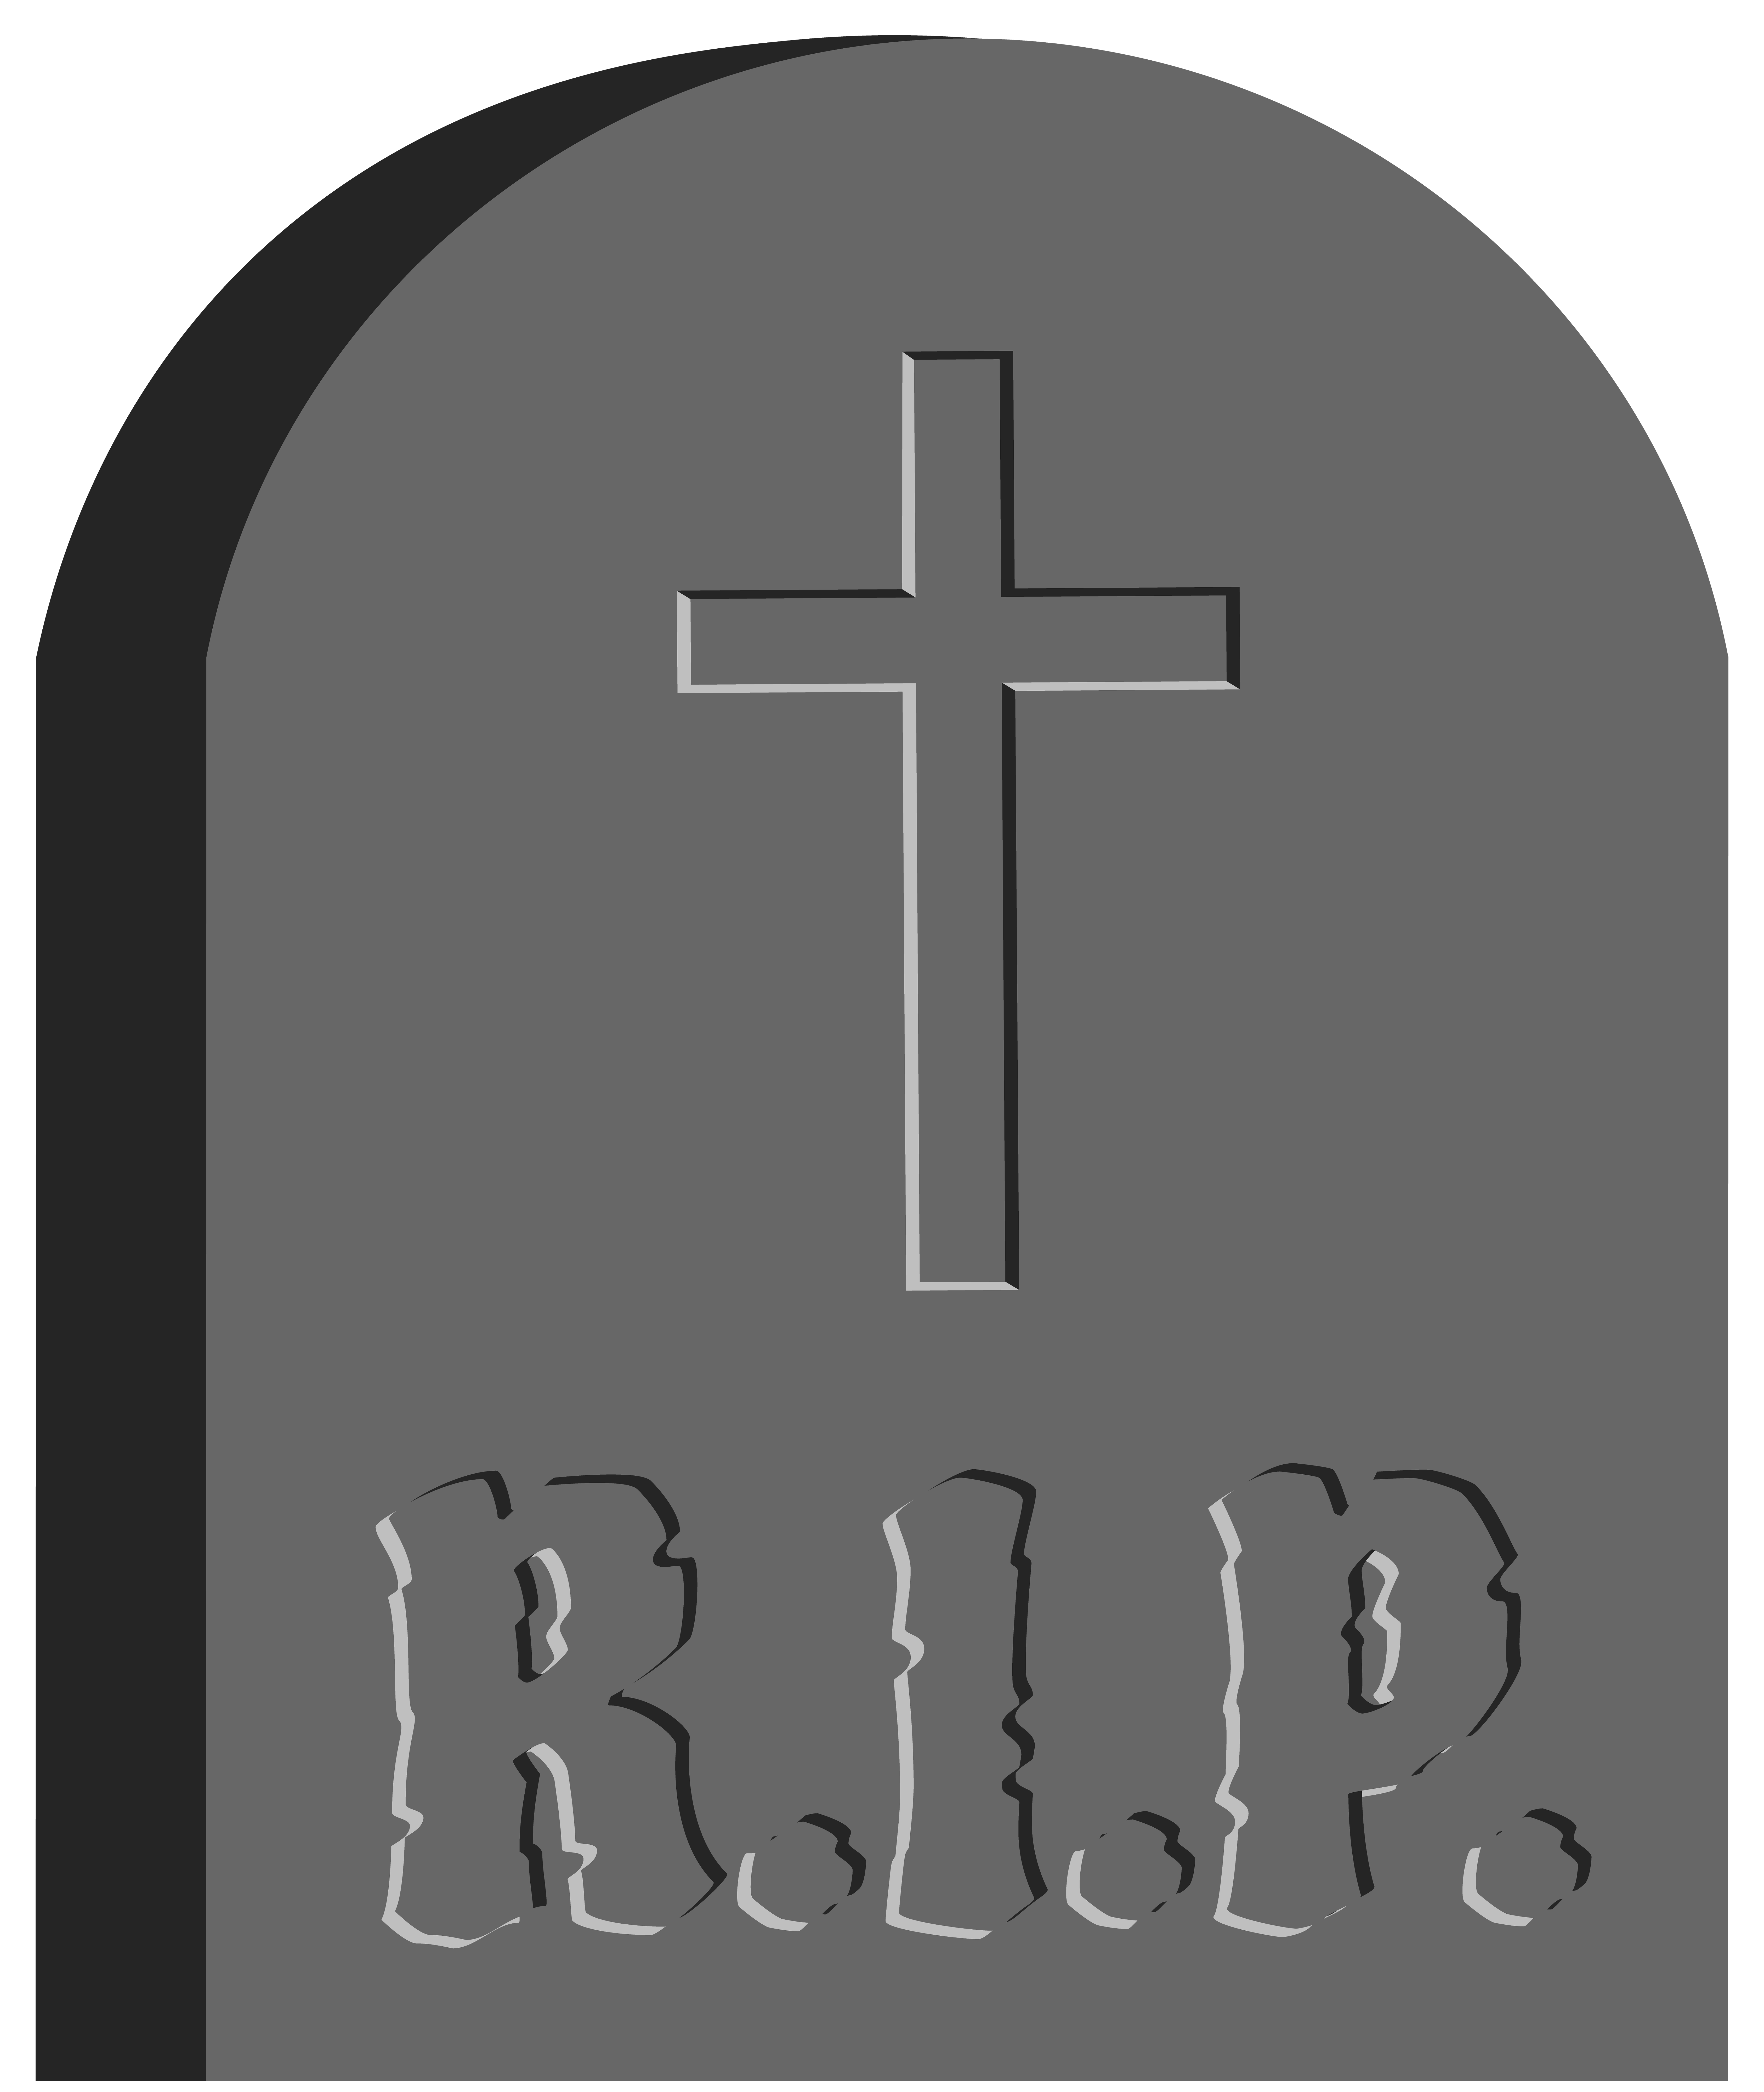 Halloween RIP Tombstone PNG Clip Art Image